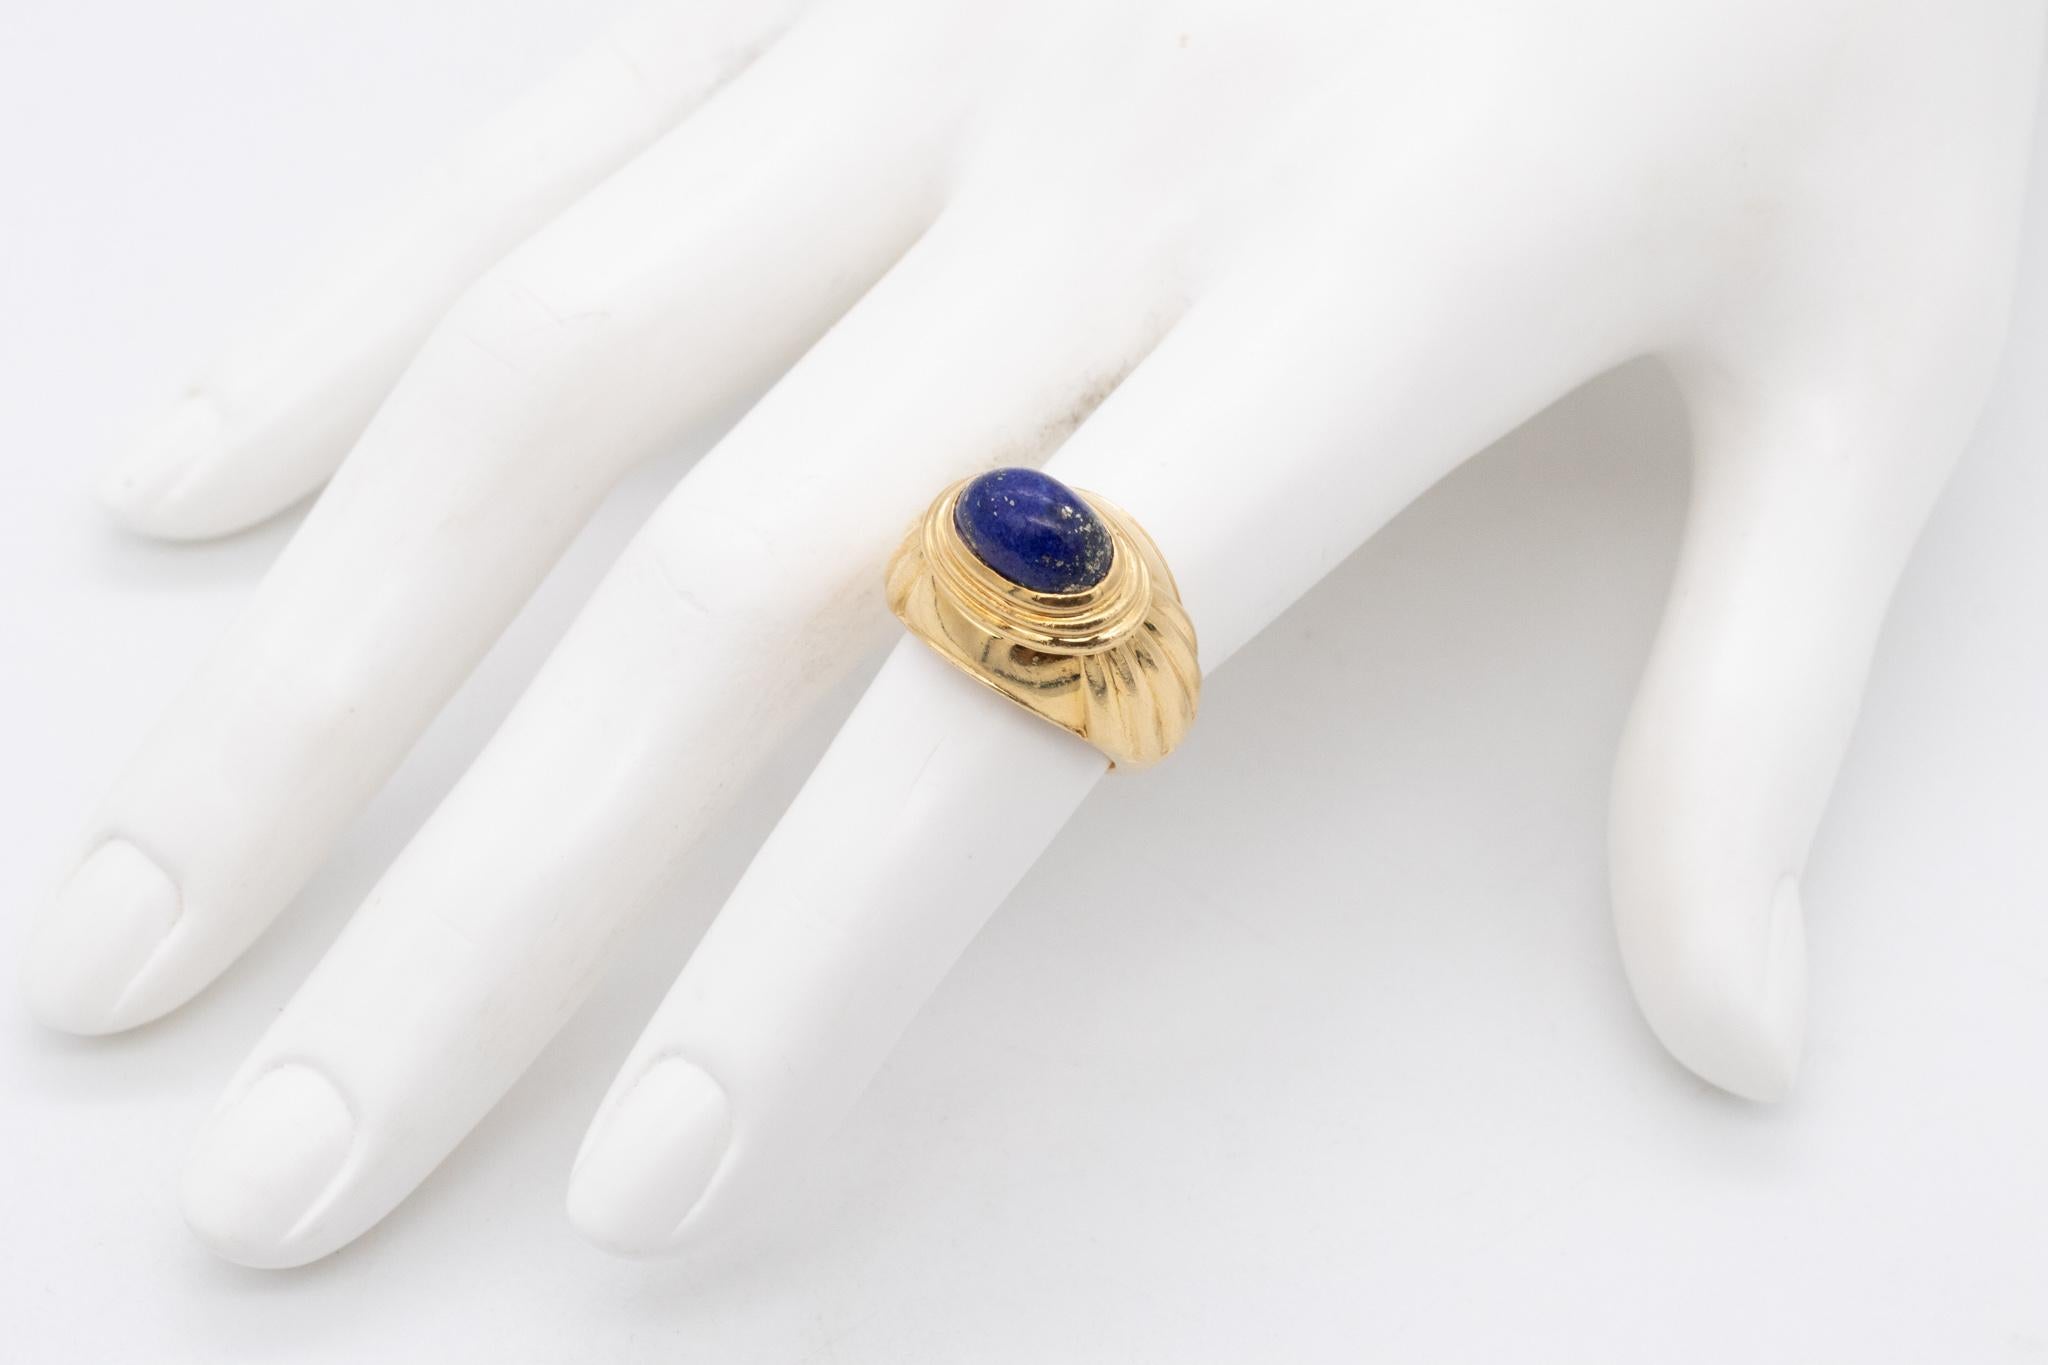 Jaipur cocktail ring designed by Boucheron.

A classic and iconic ring crafted in Paris France in solid yellow gold of 18 karats, with deco fluted stepped patterns. 

Bezel set on top, with one oval cabochon cut (7 x 10 x 5 mm) of natural blue lapis